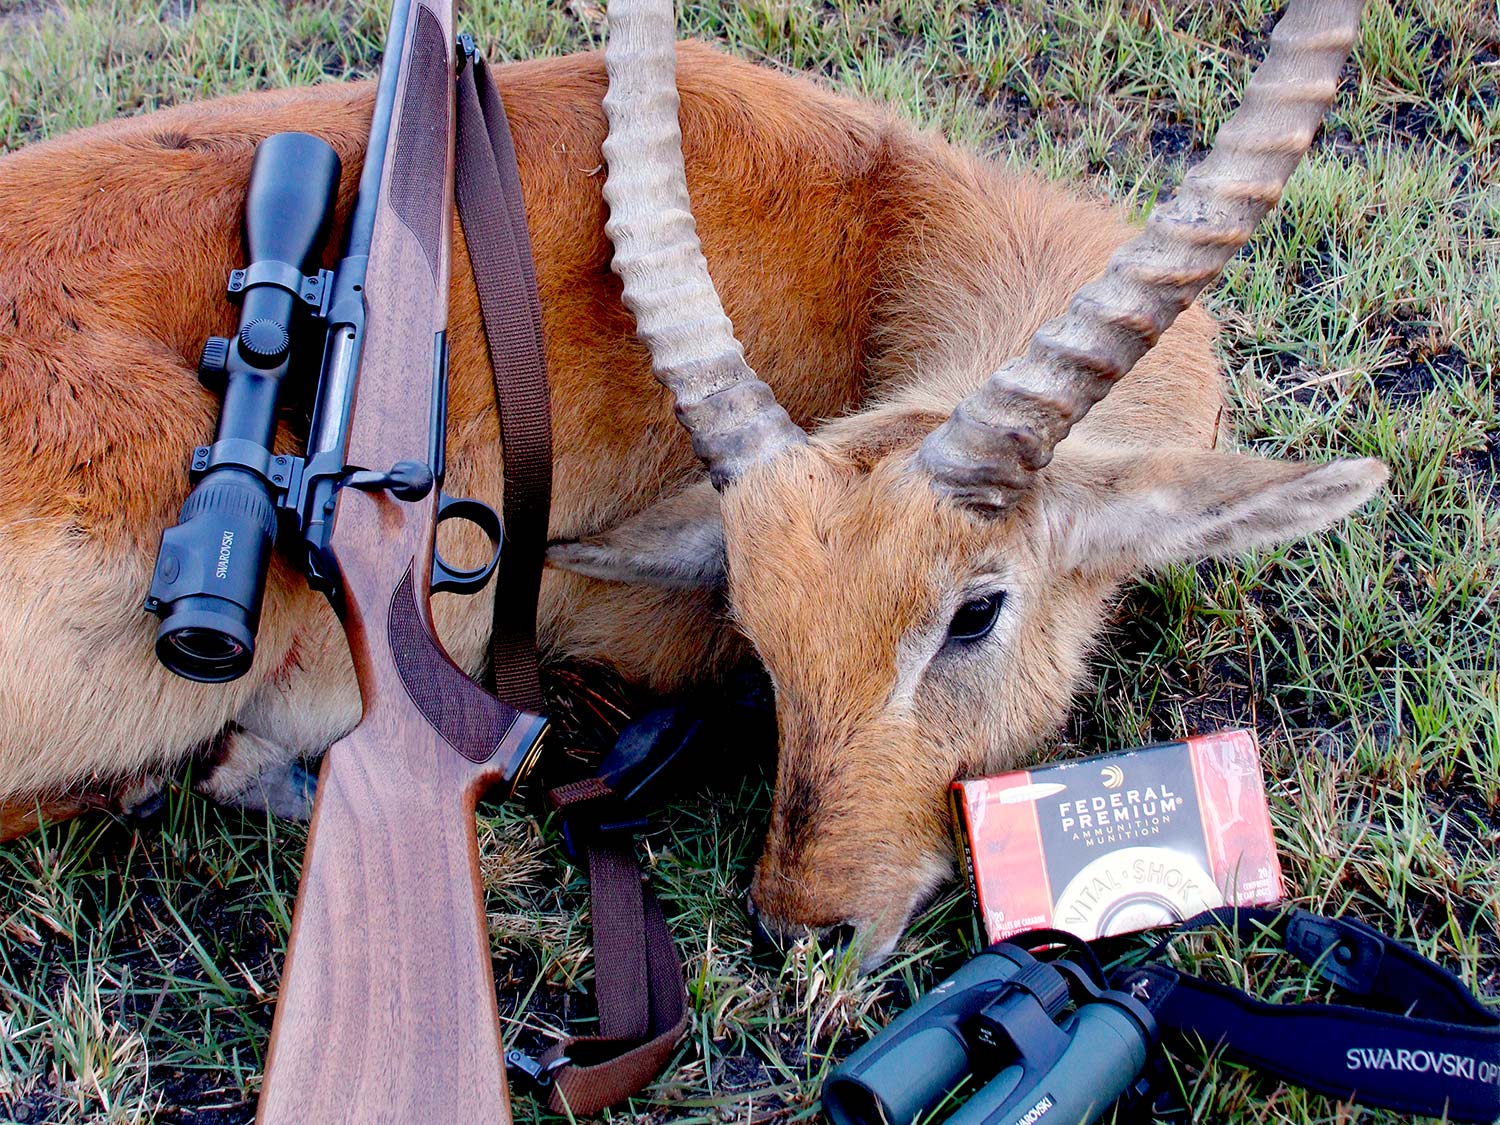 A dead African antelope on the ground with a rifle and ammo leaning against it.